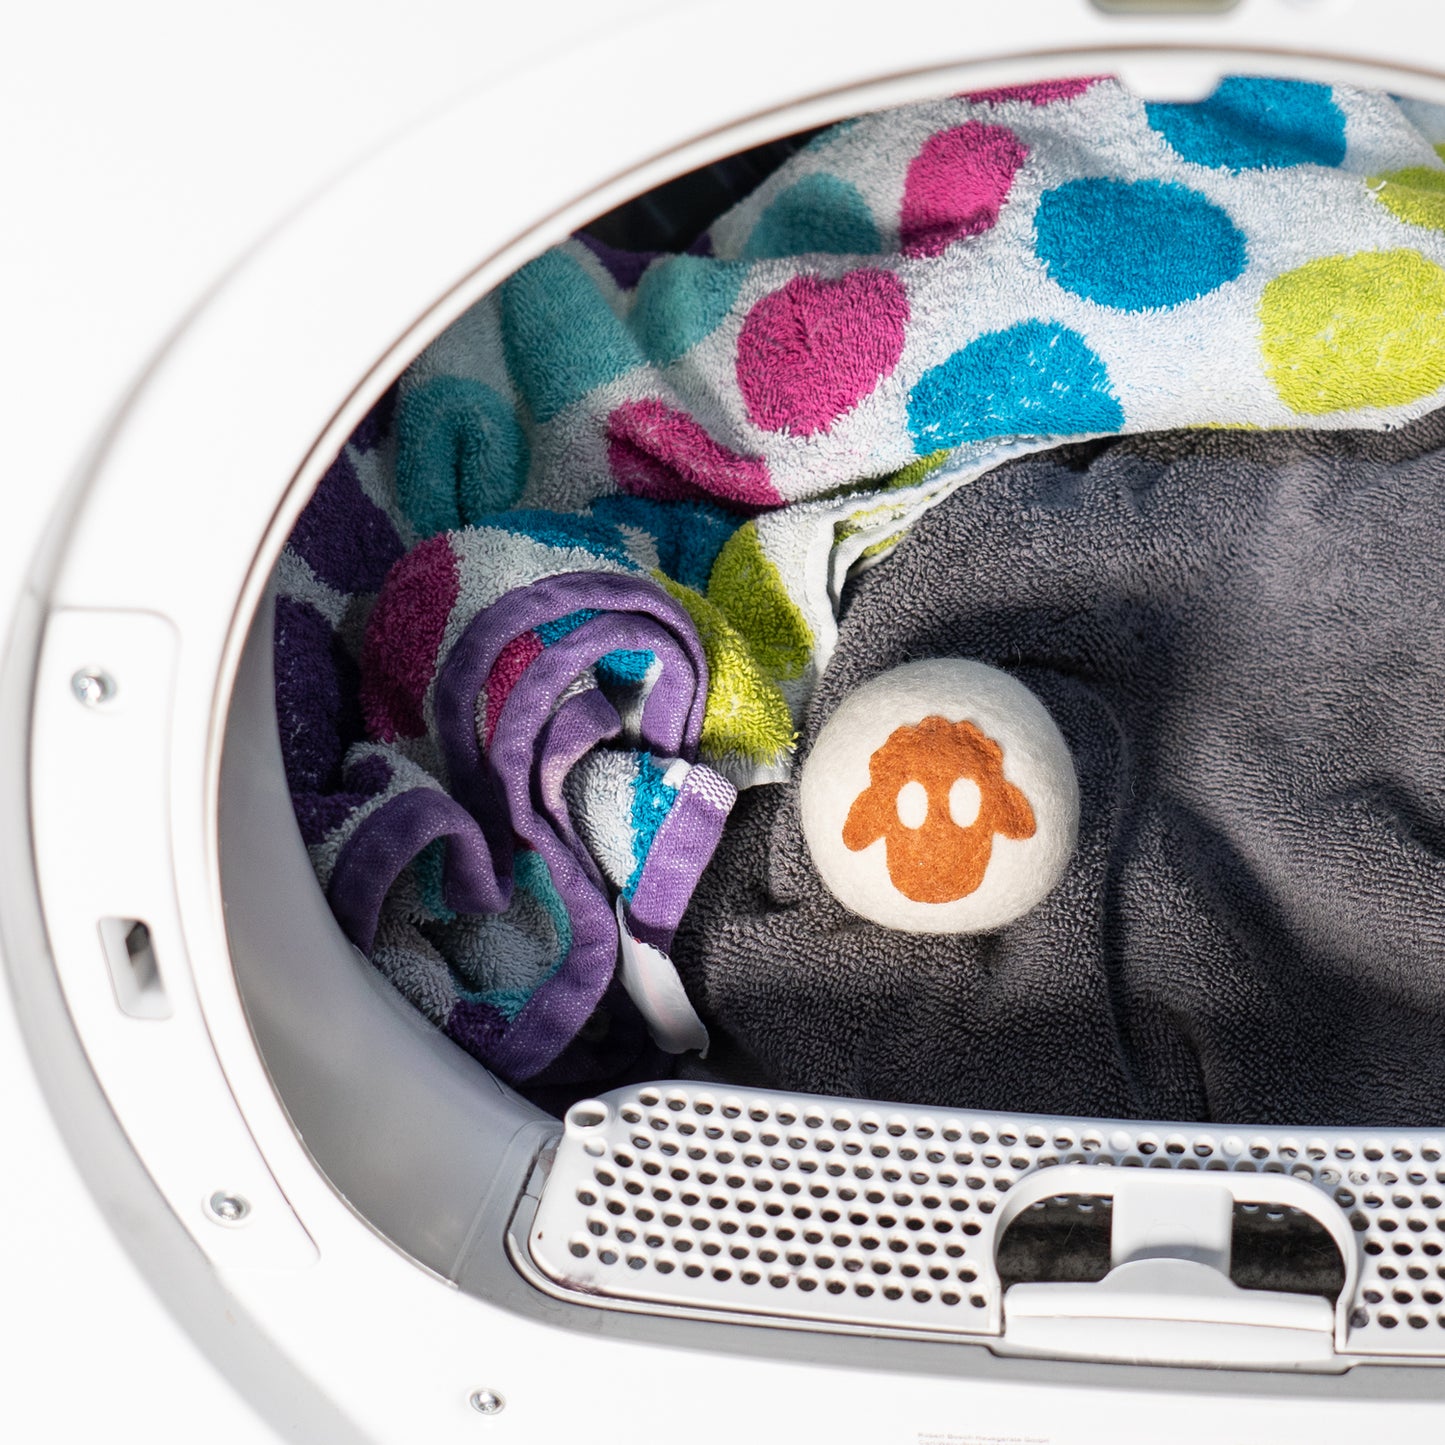 Sheep face dryer ball in tumble dryer